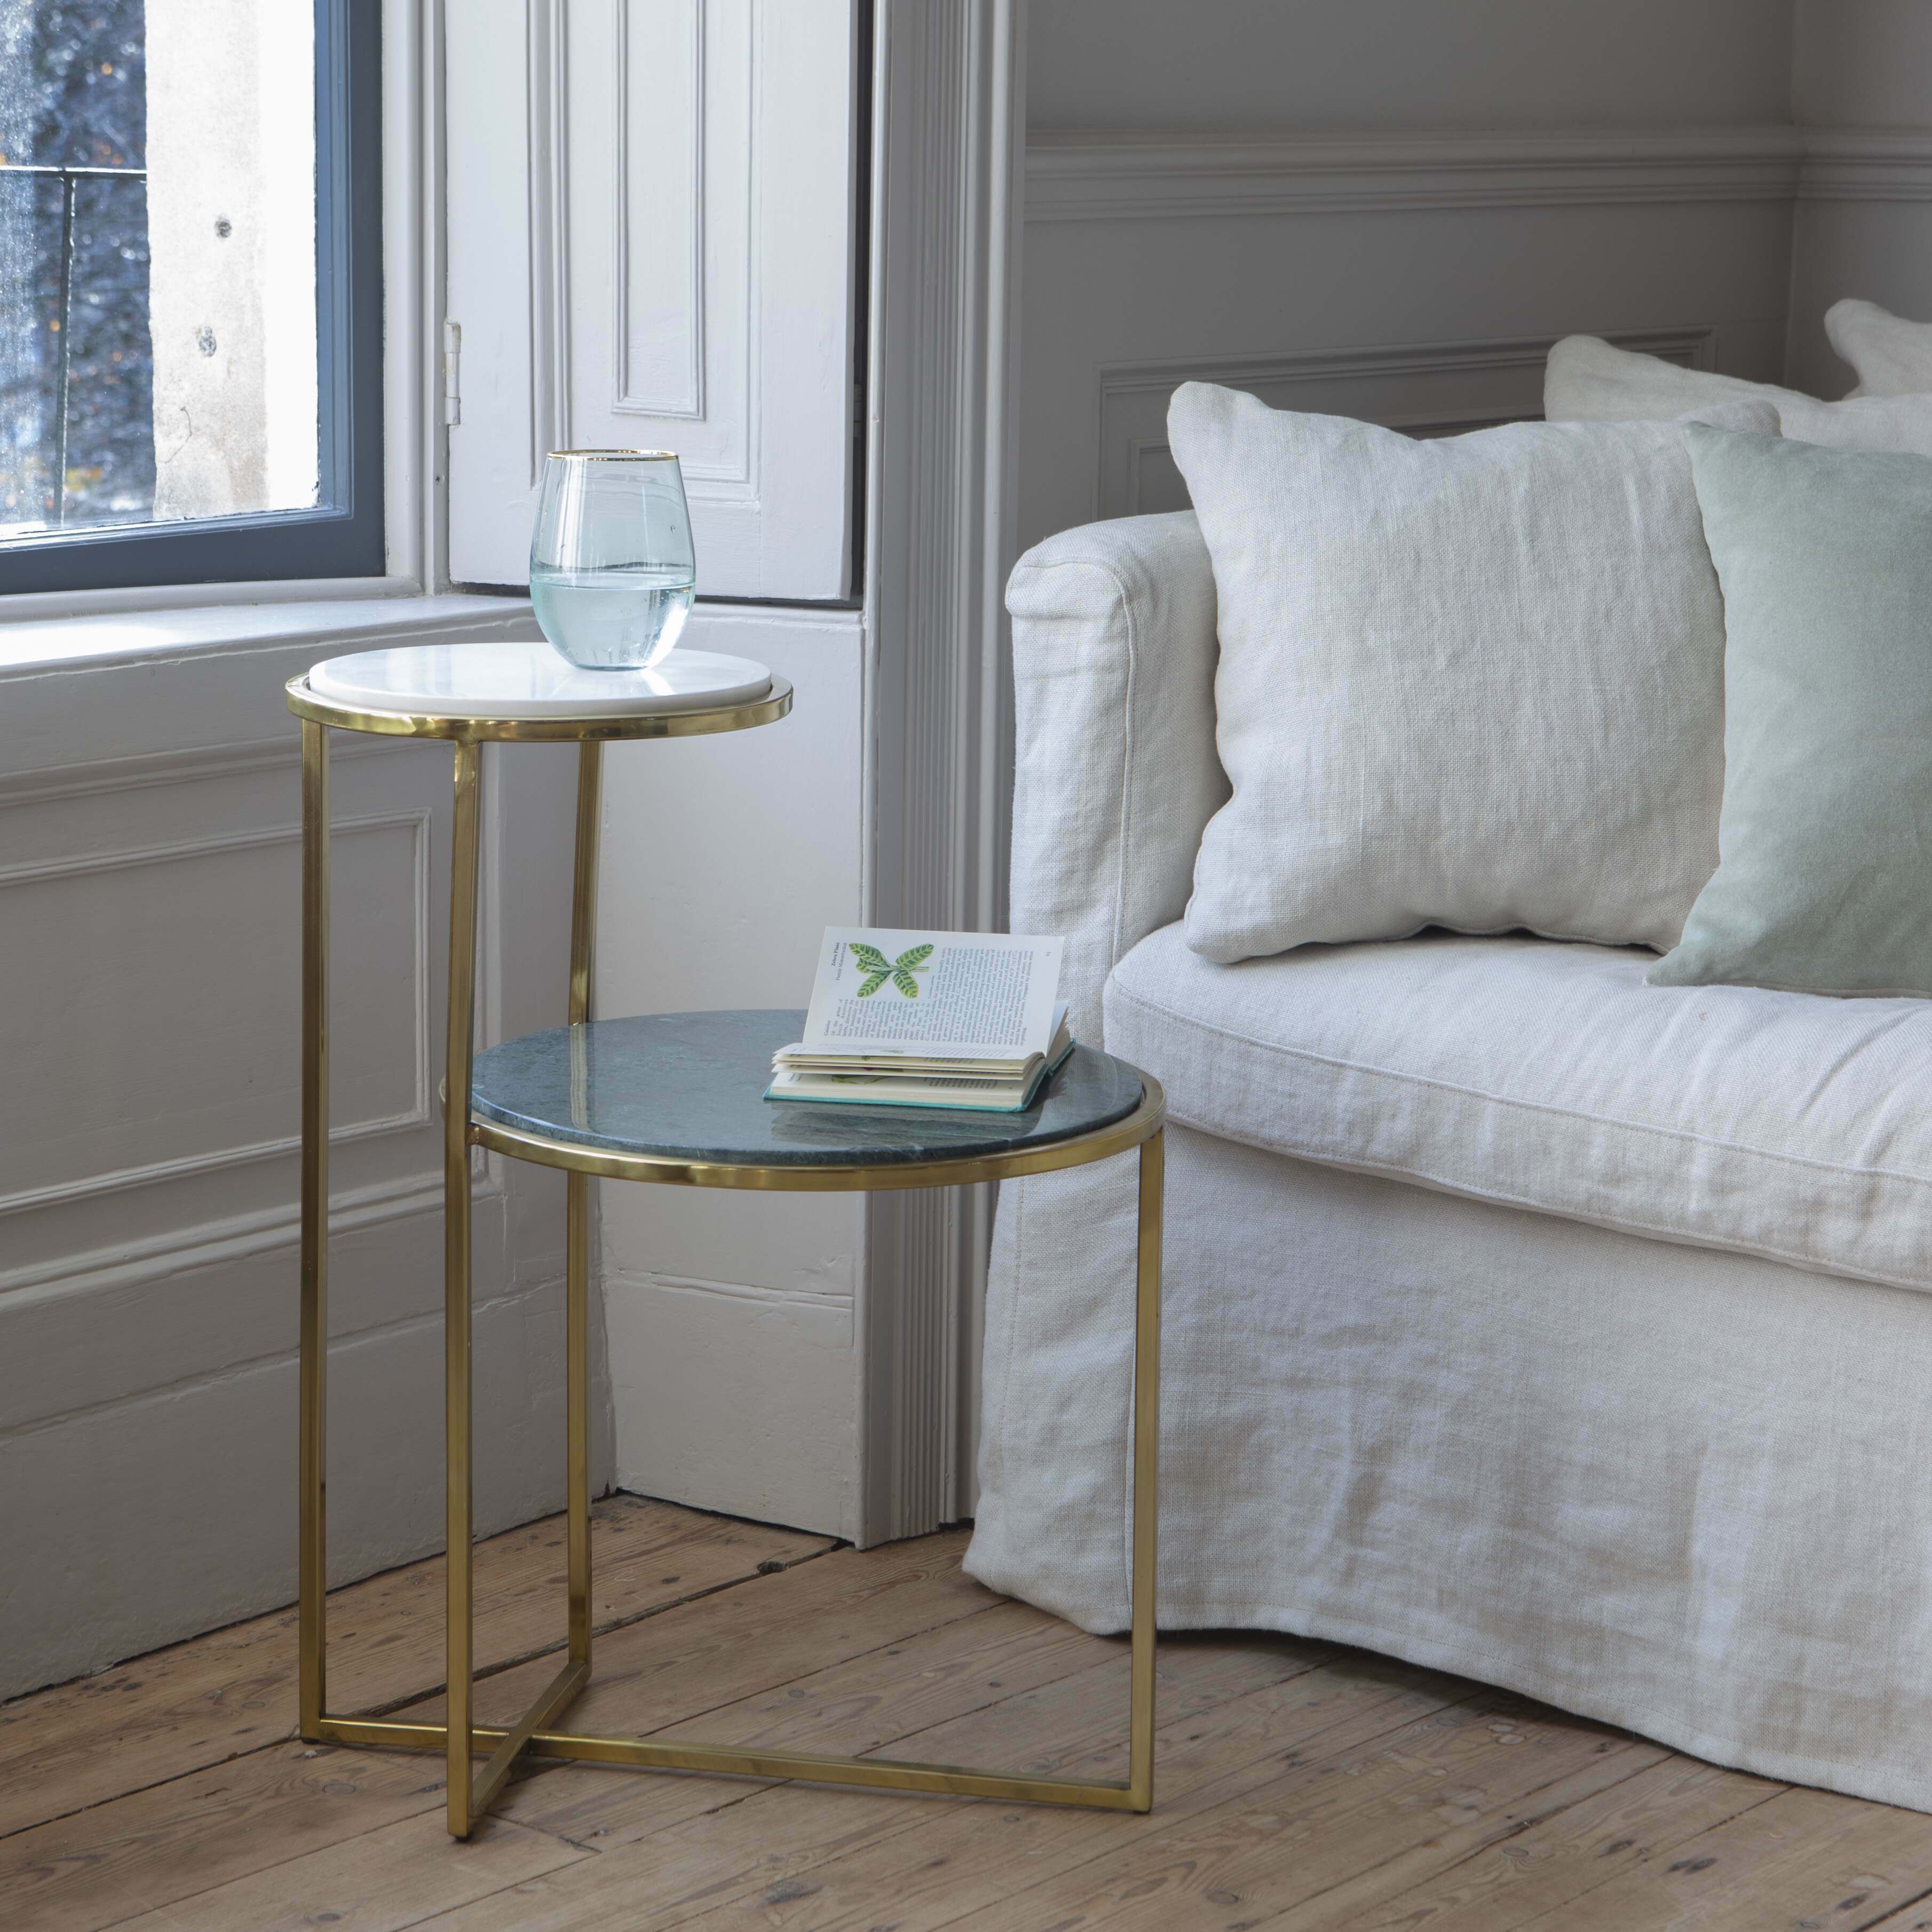 Read more about Graham and green lex tiered marble side table